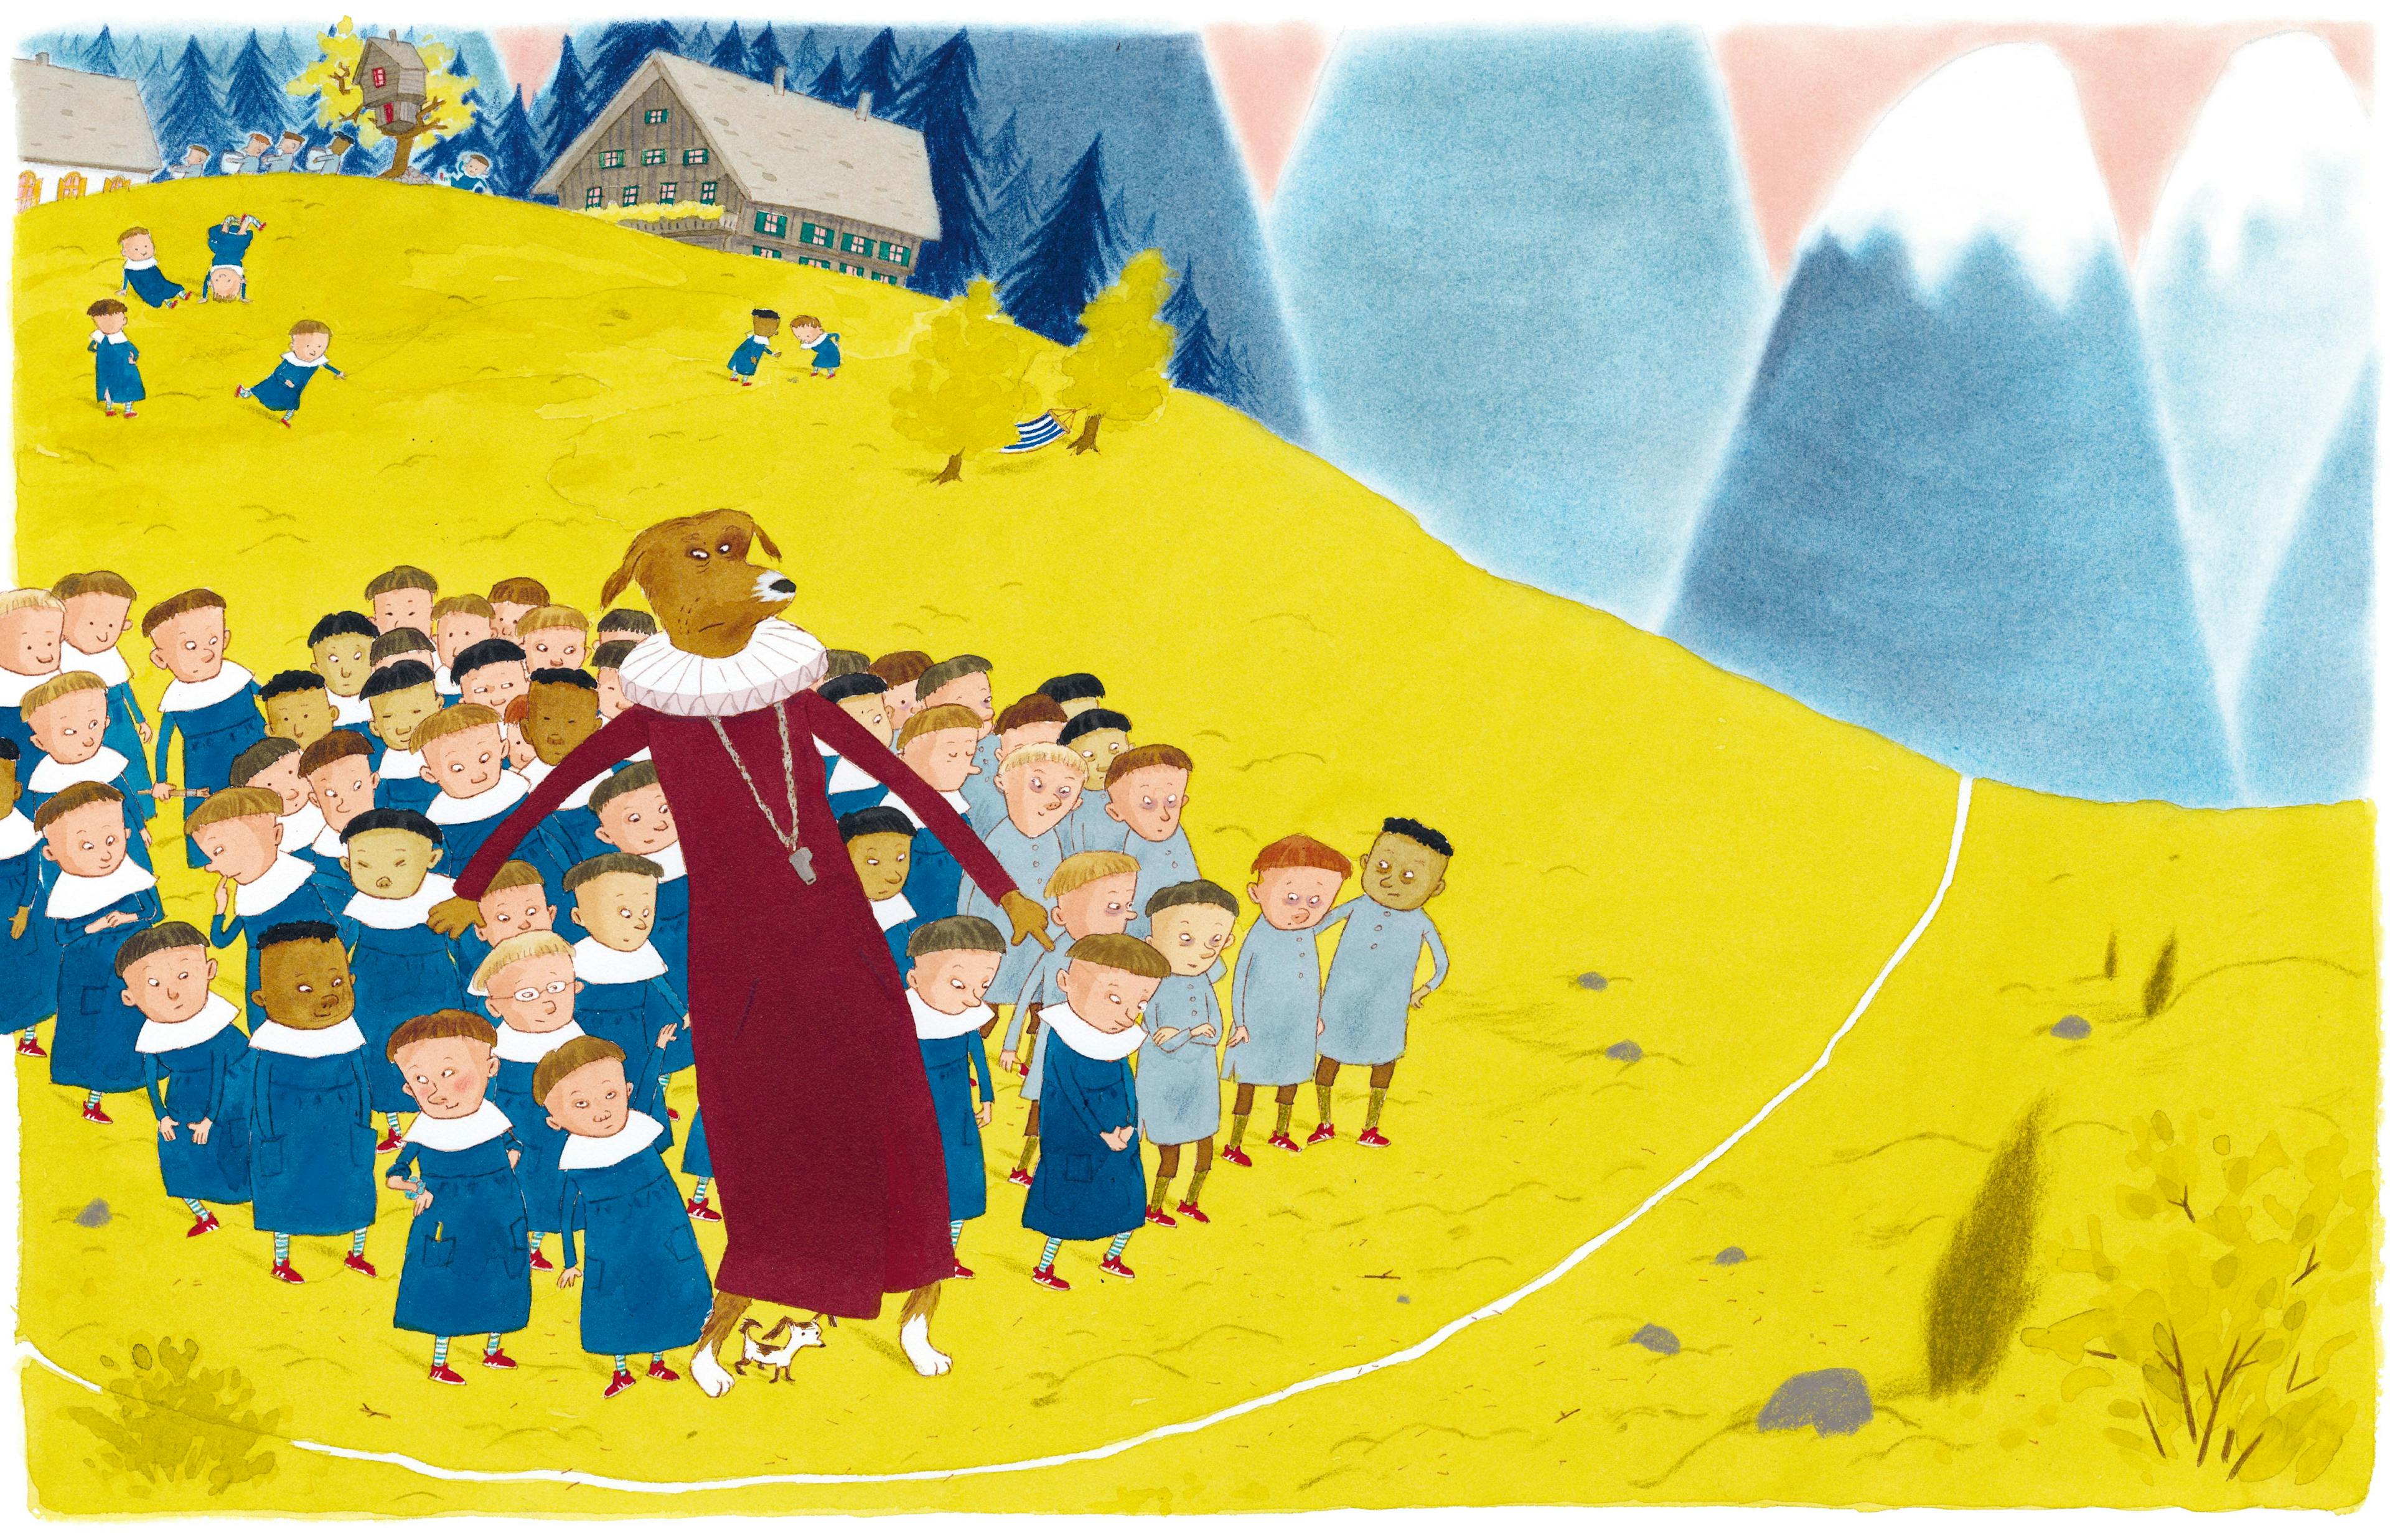 Image from the picture book Vitvitvan and Gullsippan by Pija Lindenbaum. A group of characters stand and watch intently at a line on the yellow ground.